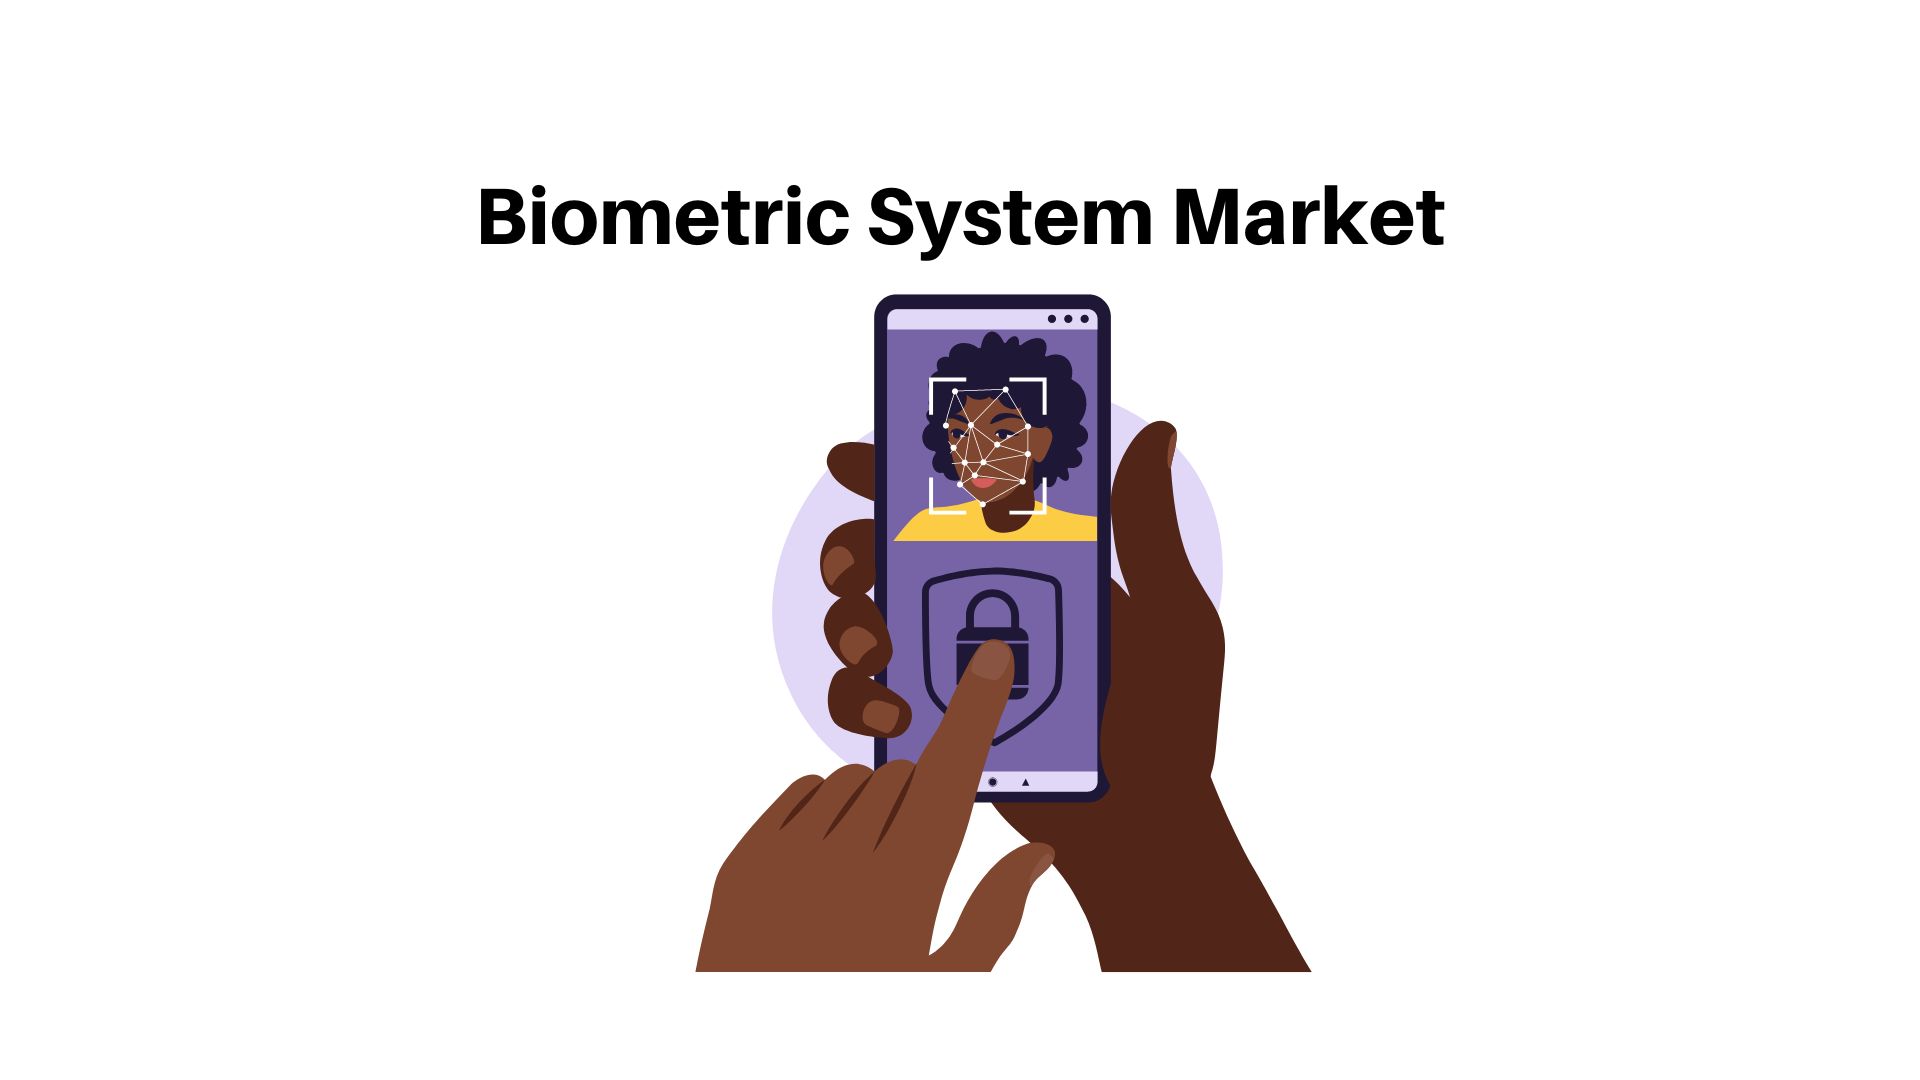 Biometric System Market is to grow at a CAGR of 14.6%, and a market value of USD 43.3 Billion in 2023